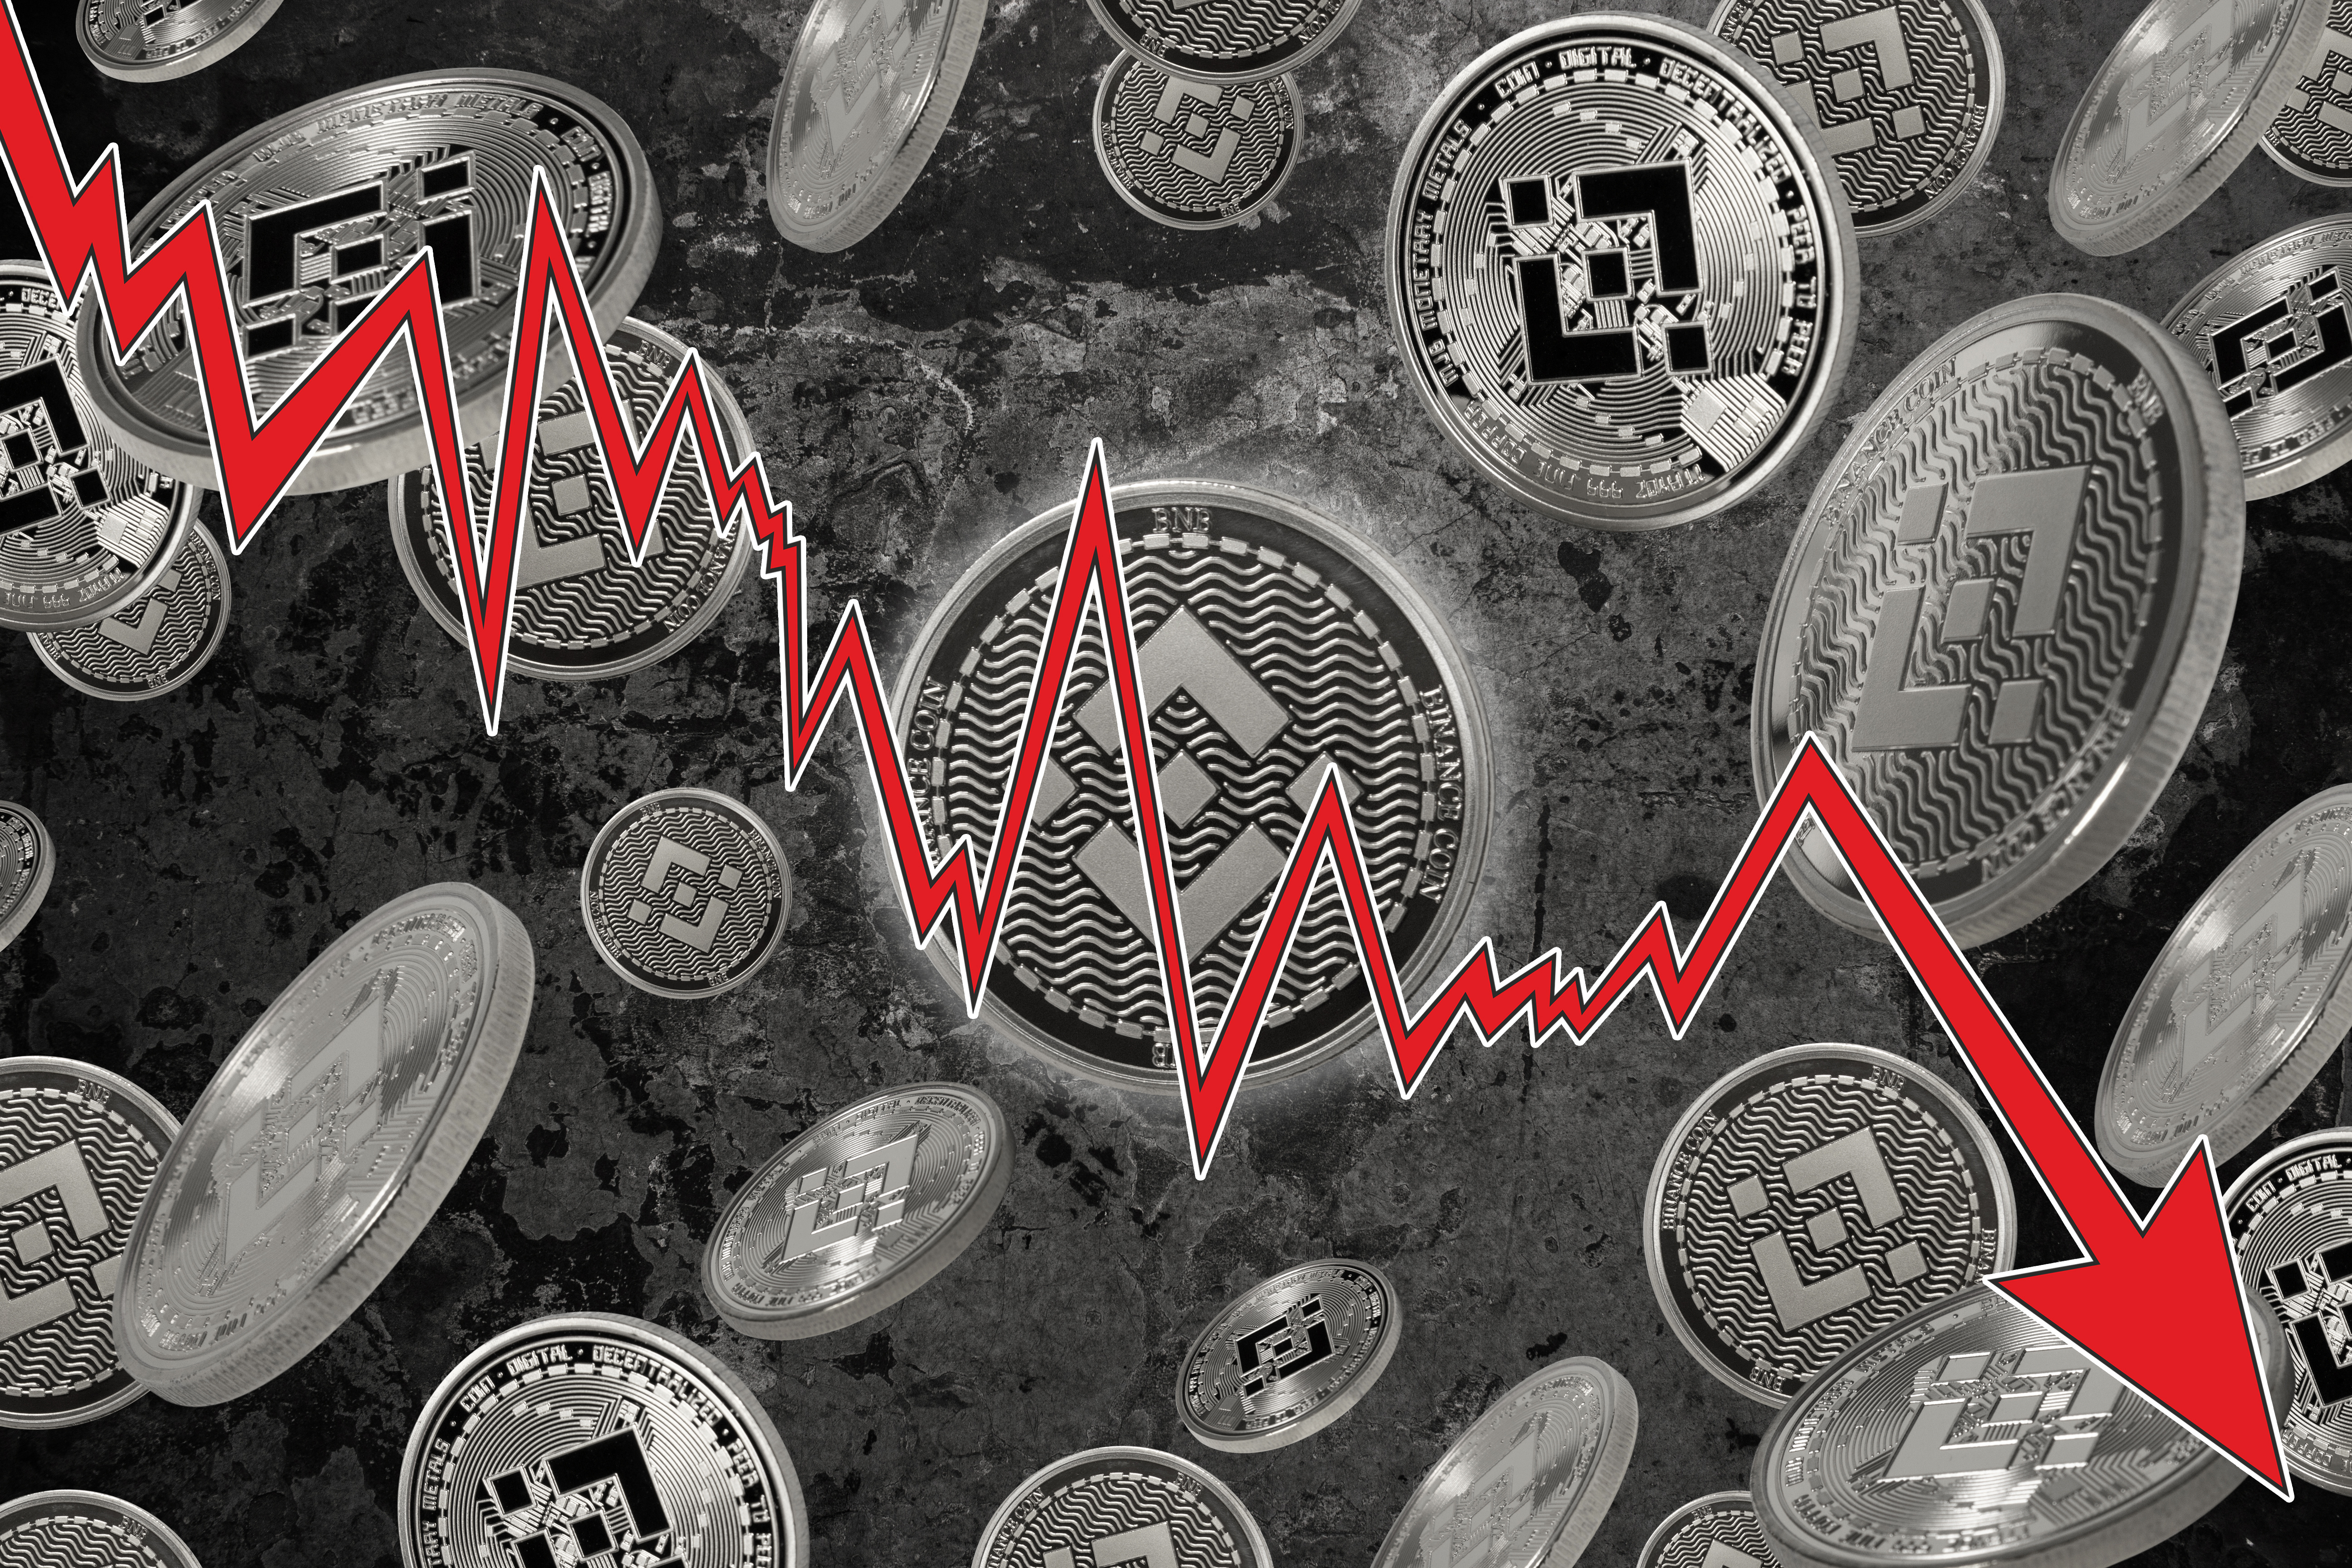 Binance's Spot Market Share Dips to 34.3% – What's Behind the Decline?